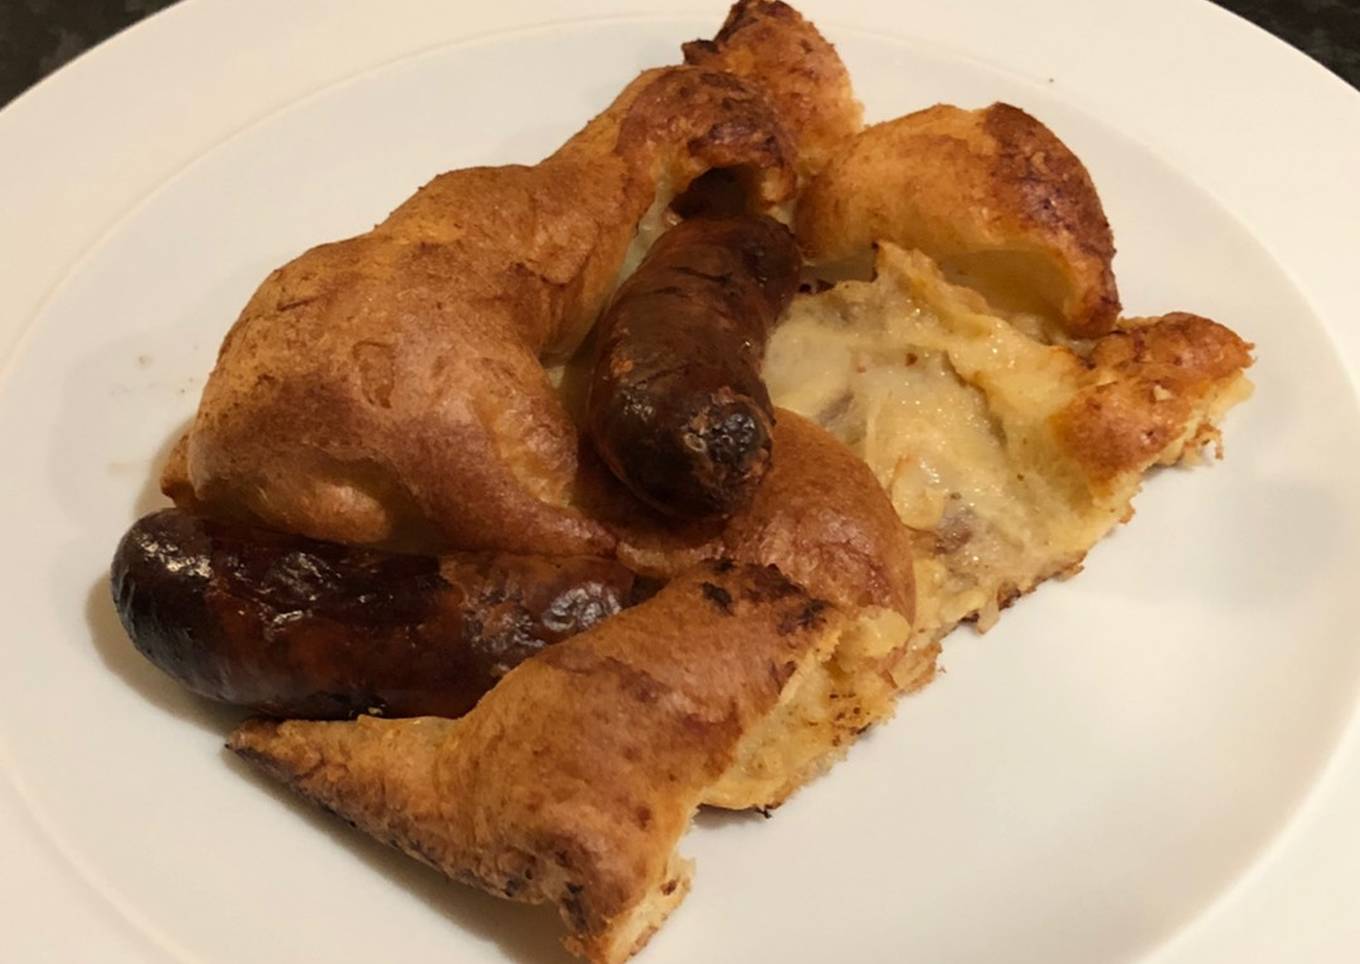 yorkshire pudding or upgrade to toad in the hole